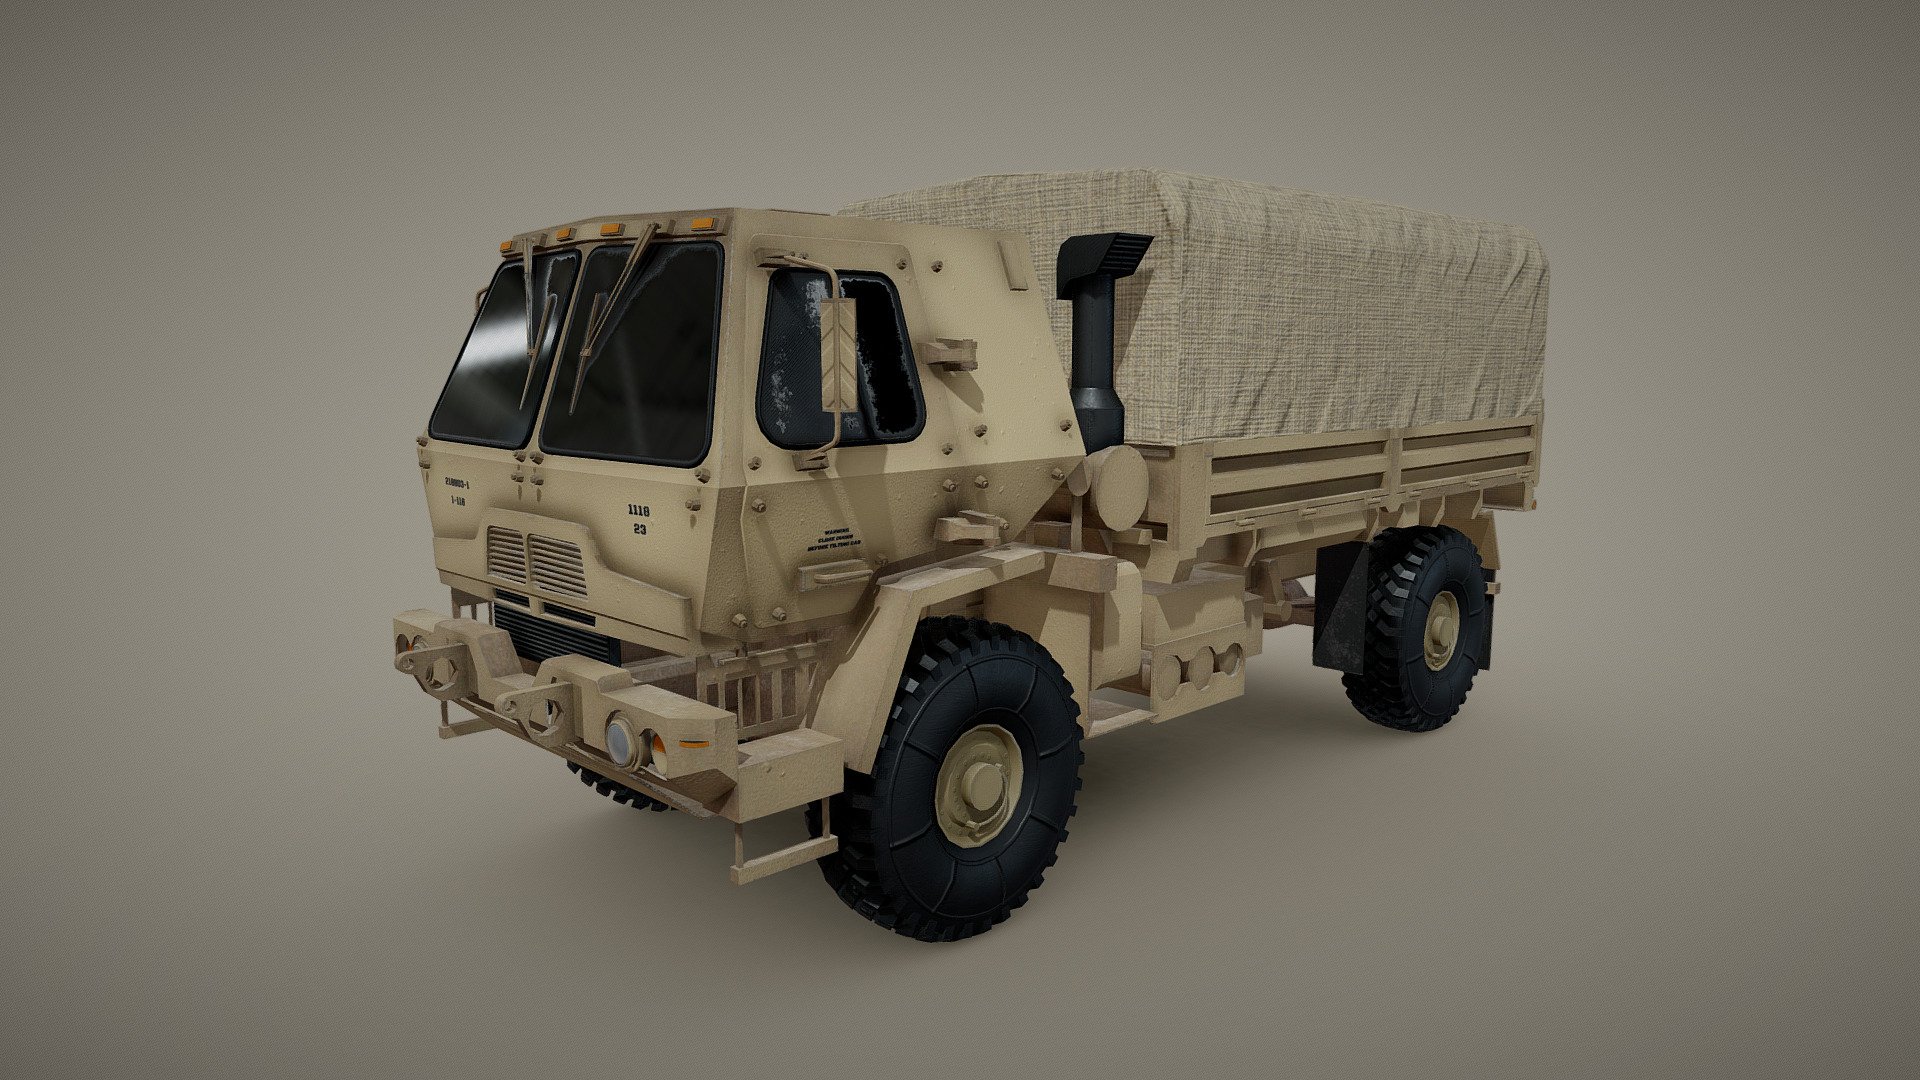 The Family of Medium Tactical Vehicles (FMTV) is a series of vehicles, based on a common chassis, that vary by payload and mission requirements. The FMTV is derived from the Austrian Steyr 12M18 truck, but substantially modified to meet United States Army requirements, these including a minimum 50 percent U.S. content. There were originally 17 FMTV variants—four variants in the nominal 2.5 U.S. ton payload class, designated Light Medium Tactical Vehicle (LMTV), and 13 variants with a nominal 5 U.S. ton payload rating, called Medium Tactical Vehicle (MTV) 3d model